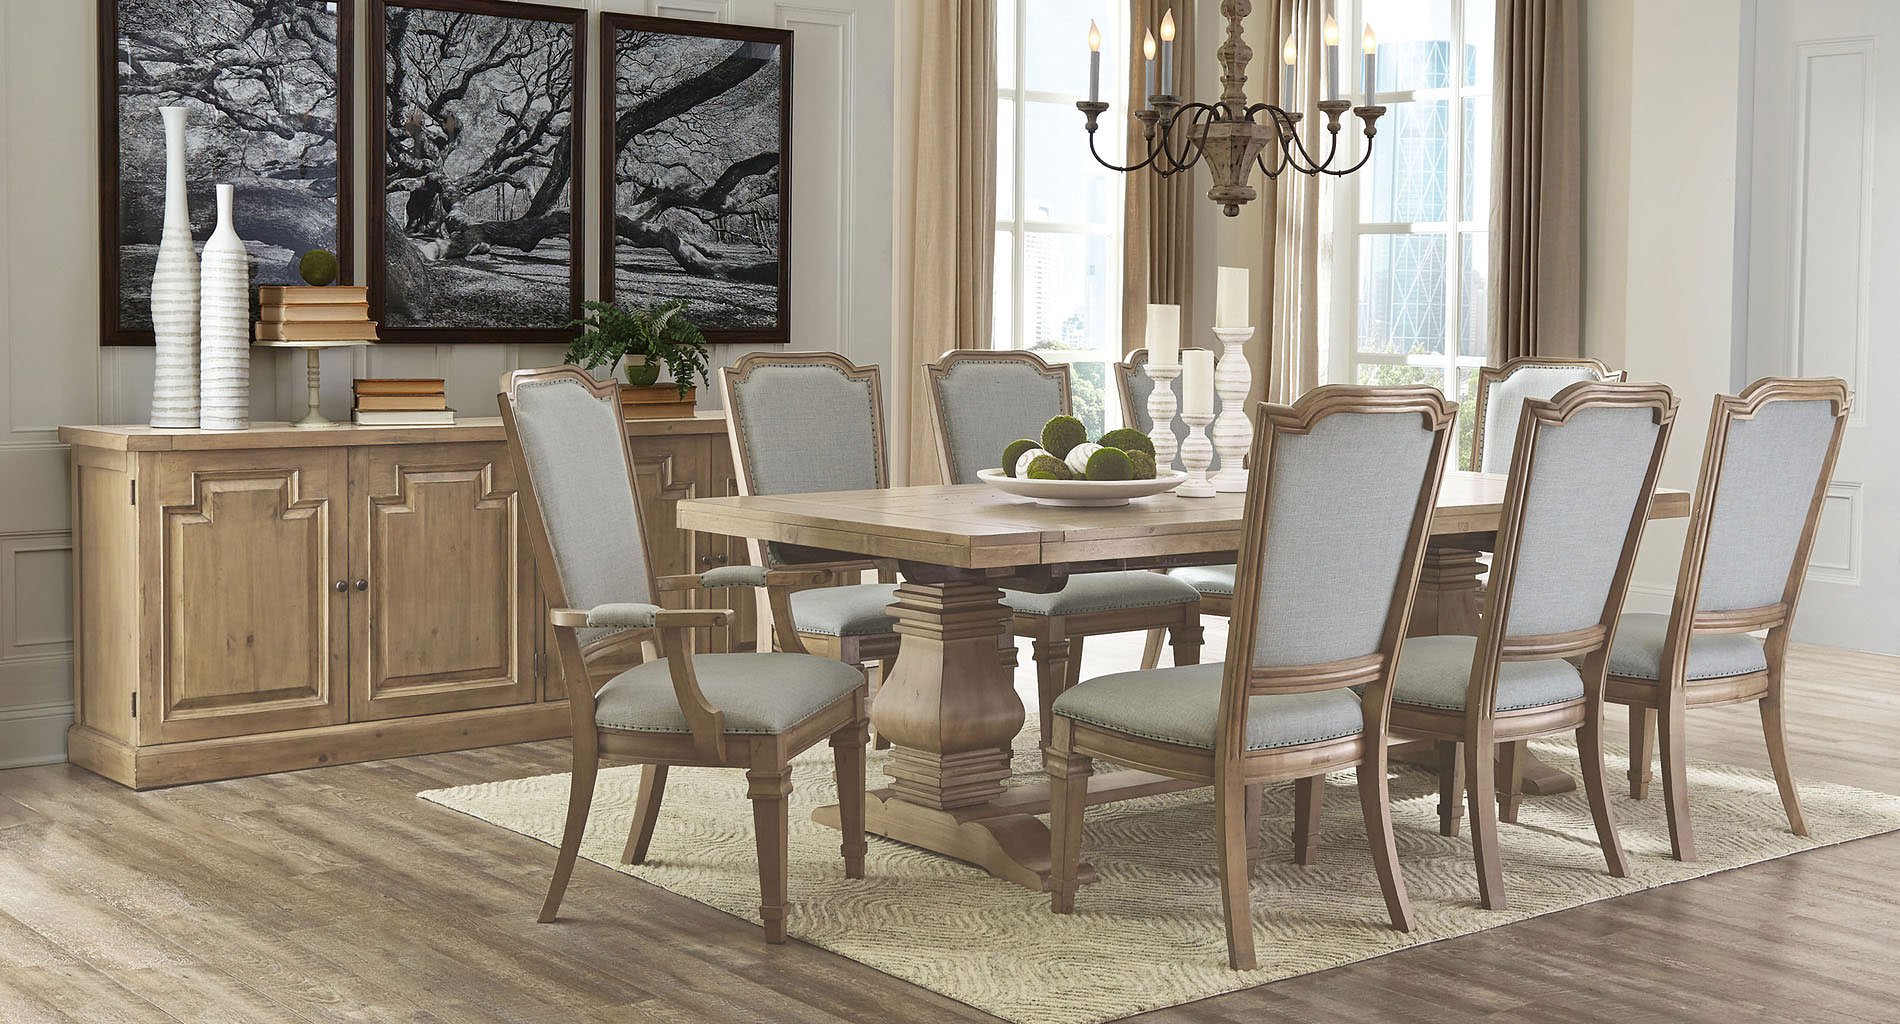 florence rectangular dining room set w vintage chairs